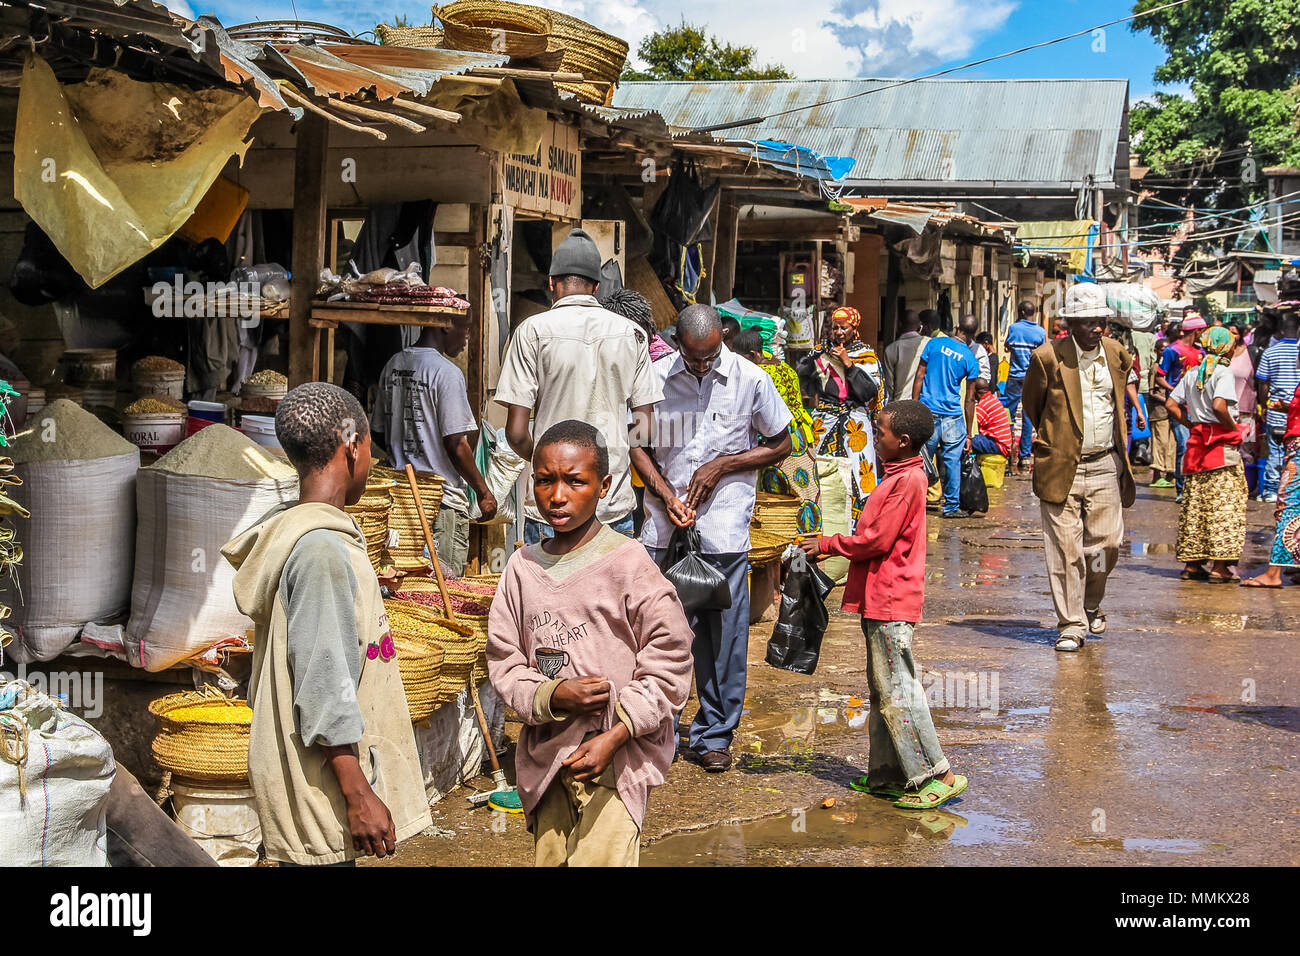 Arusha, Tanzania, Africa - January 2, 2013: Children on the road in a market of the town. These african markets are full of colors and people selling their local products and their own cultivated fruits and vegetables Stock Photo